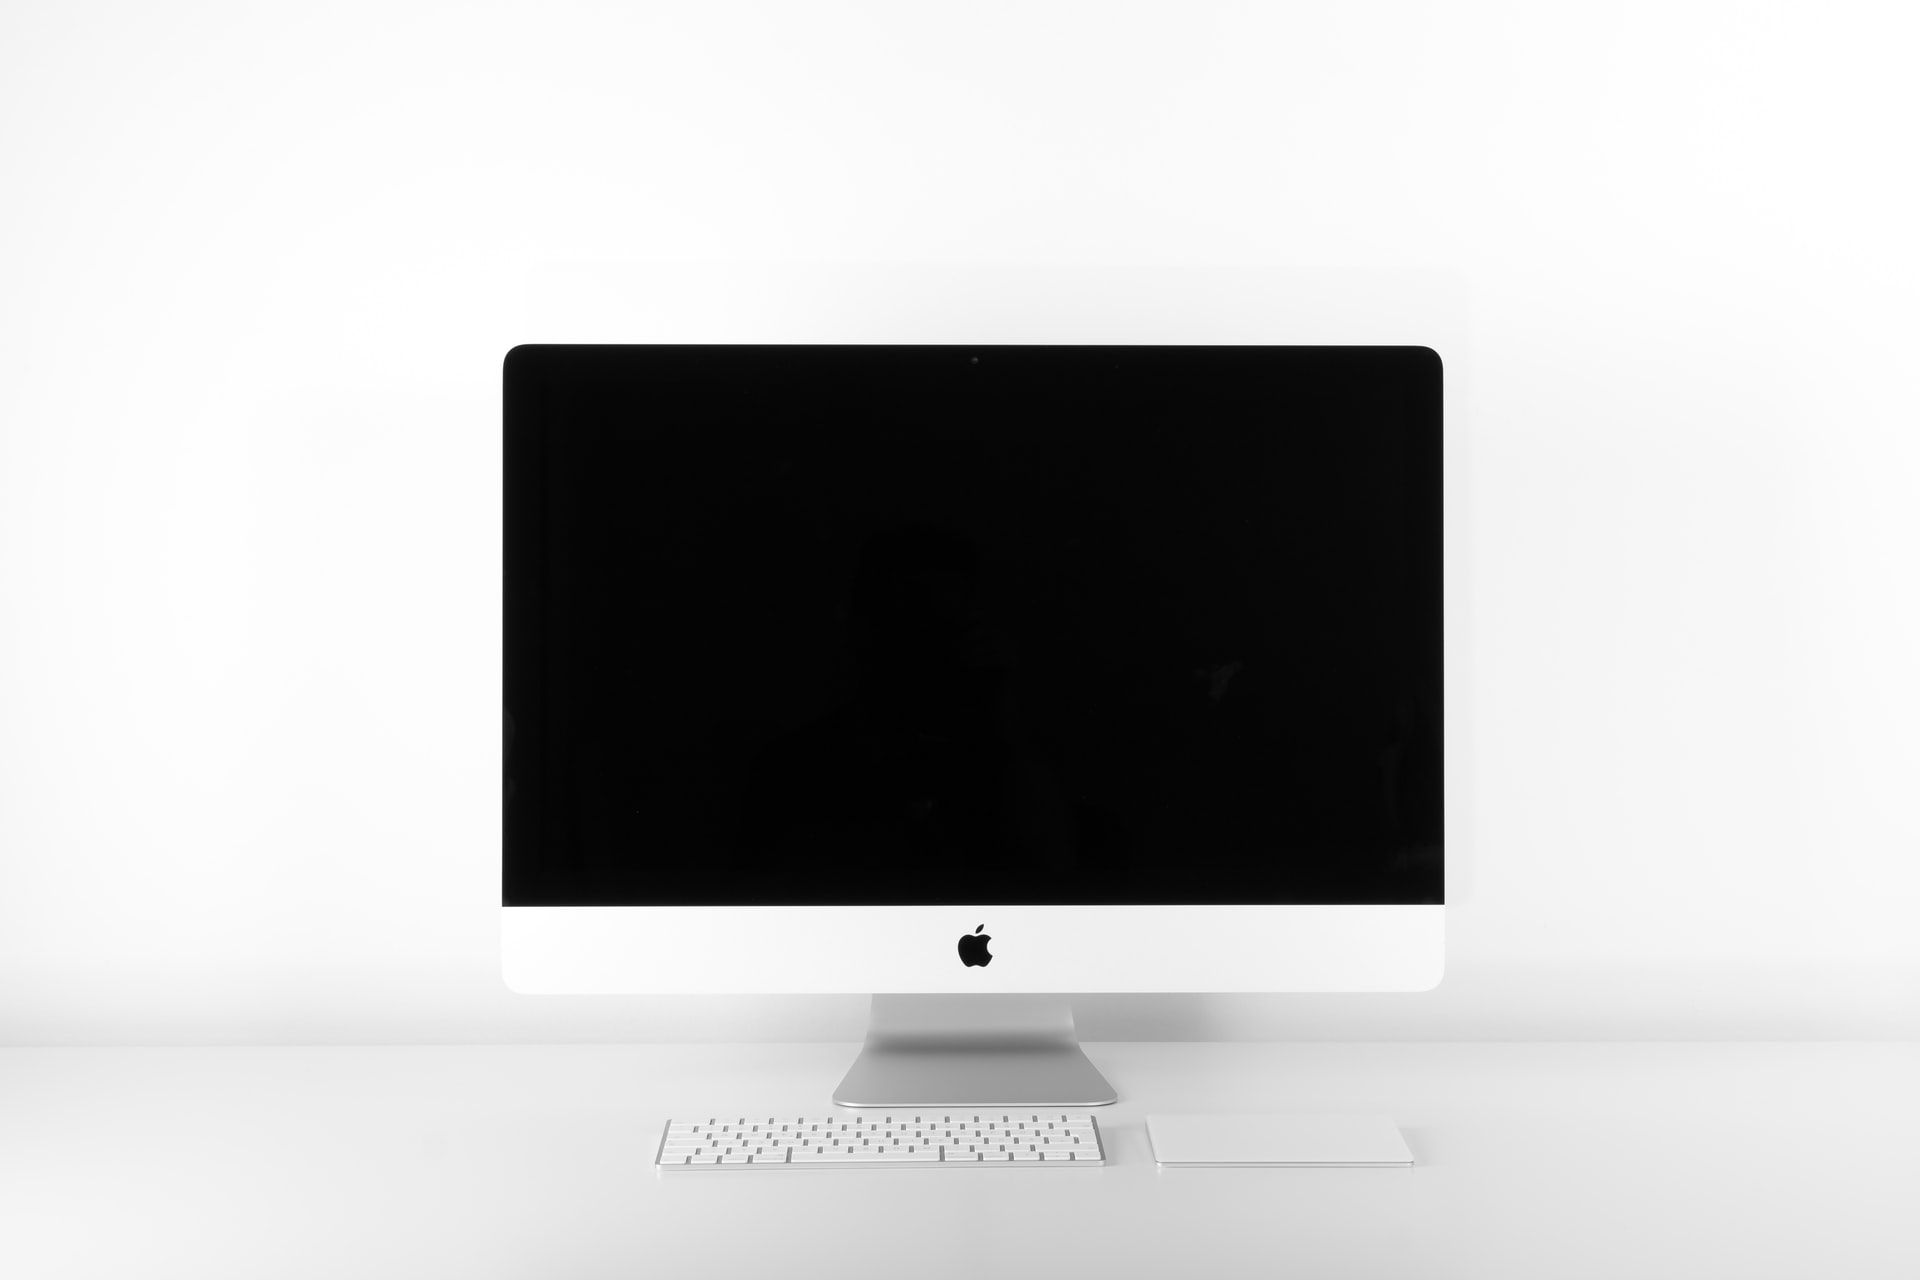 Fully Automated Lab iMac Deployment with Jamf Pro & ADE: Part 4 - Deploying our Applications